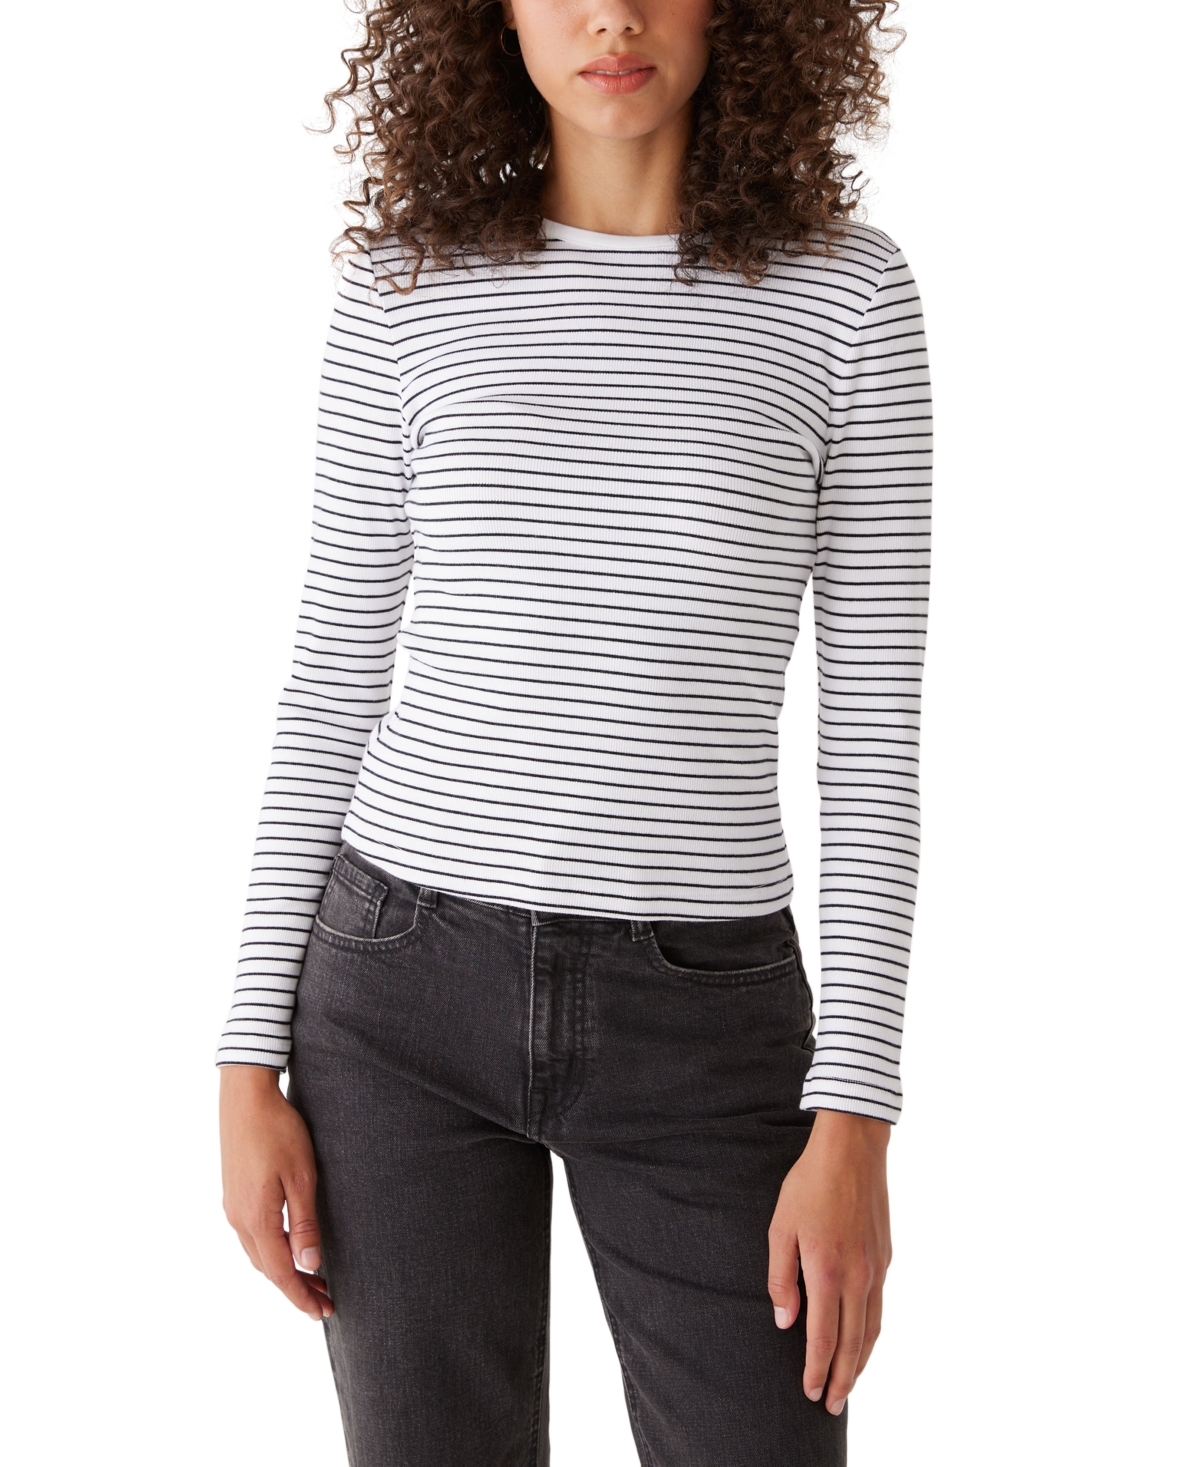 Women's Long-Sleeve Ribbed Top - Black And White Stripe